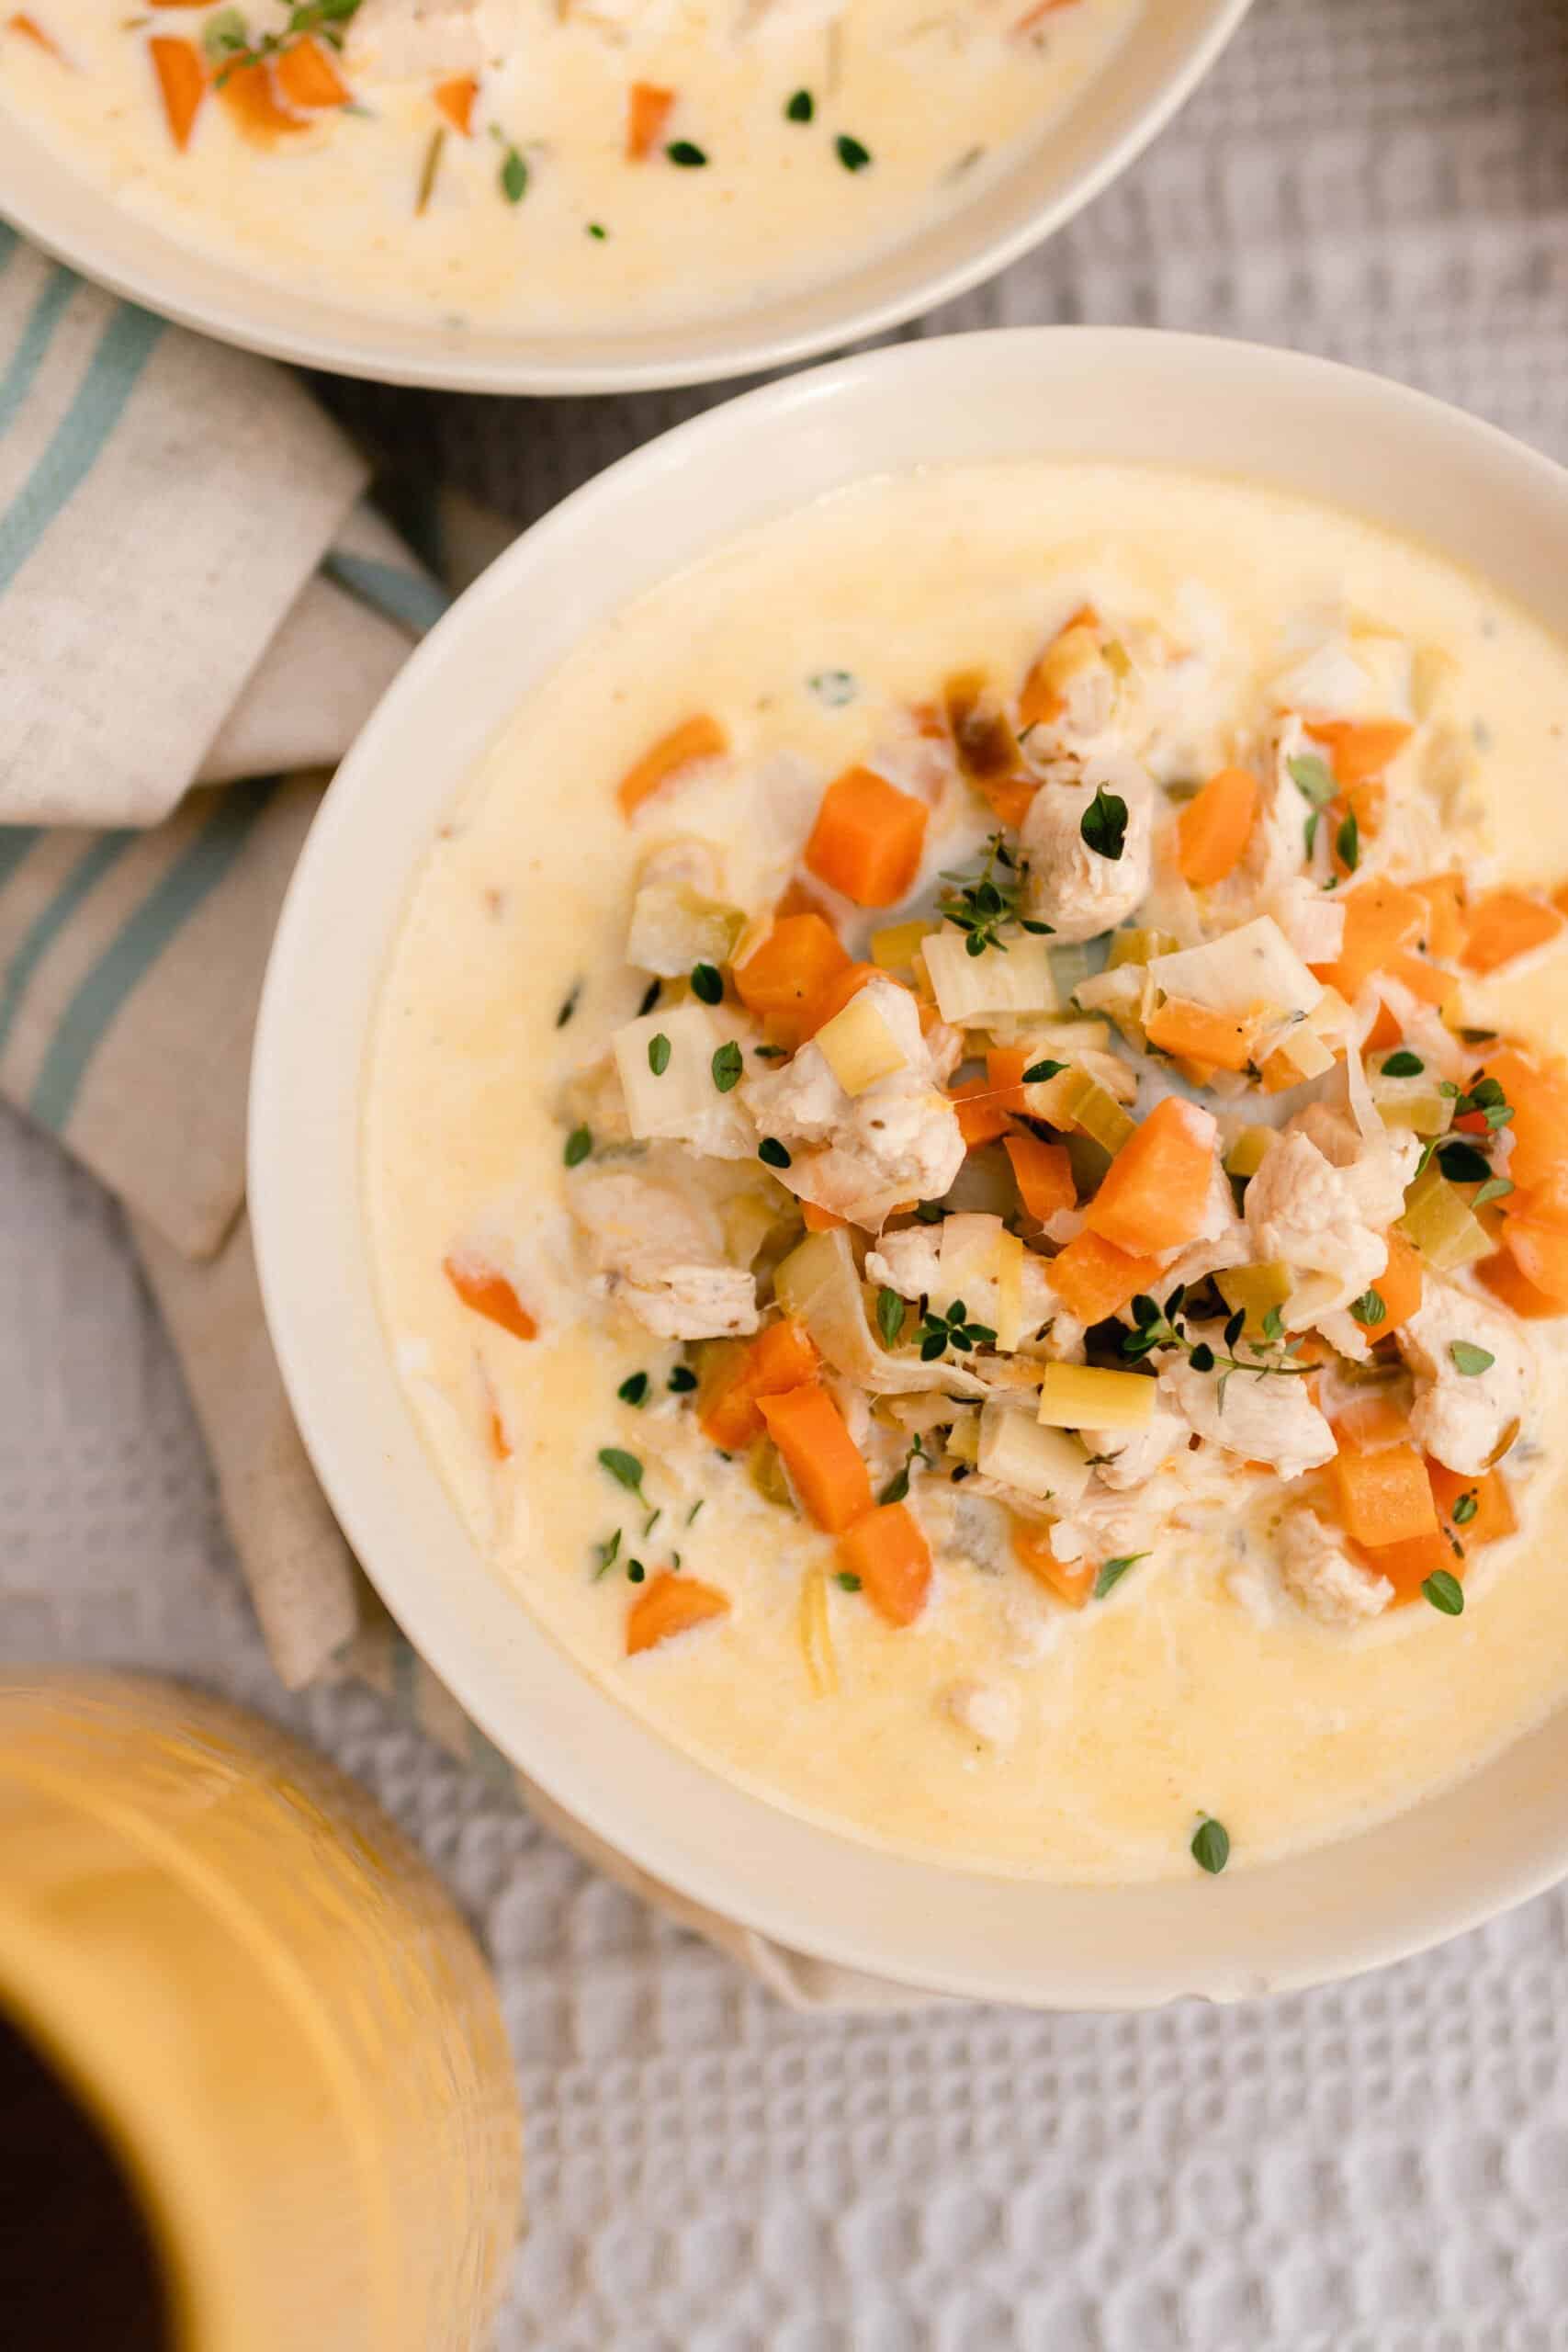 https://www.farmhouseonboone.com/wp-content/uploads/2020/10/creamy-chicken-soup-14-scaled.jpg